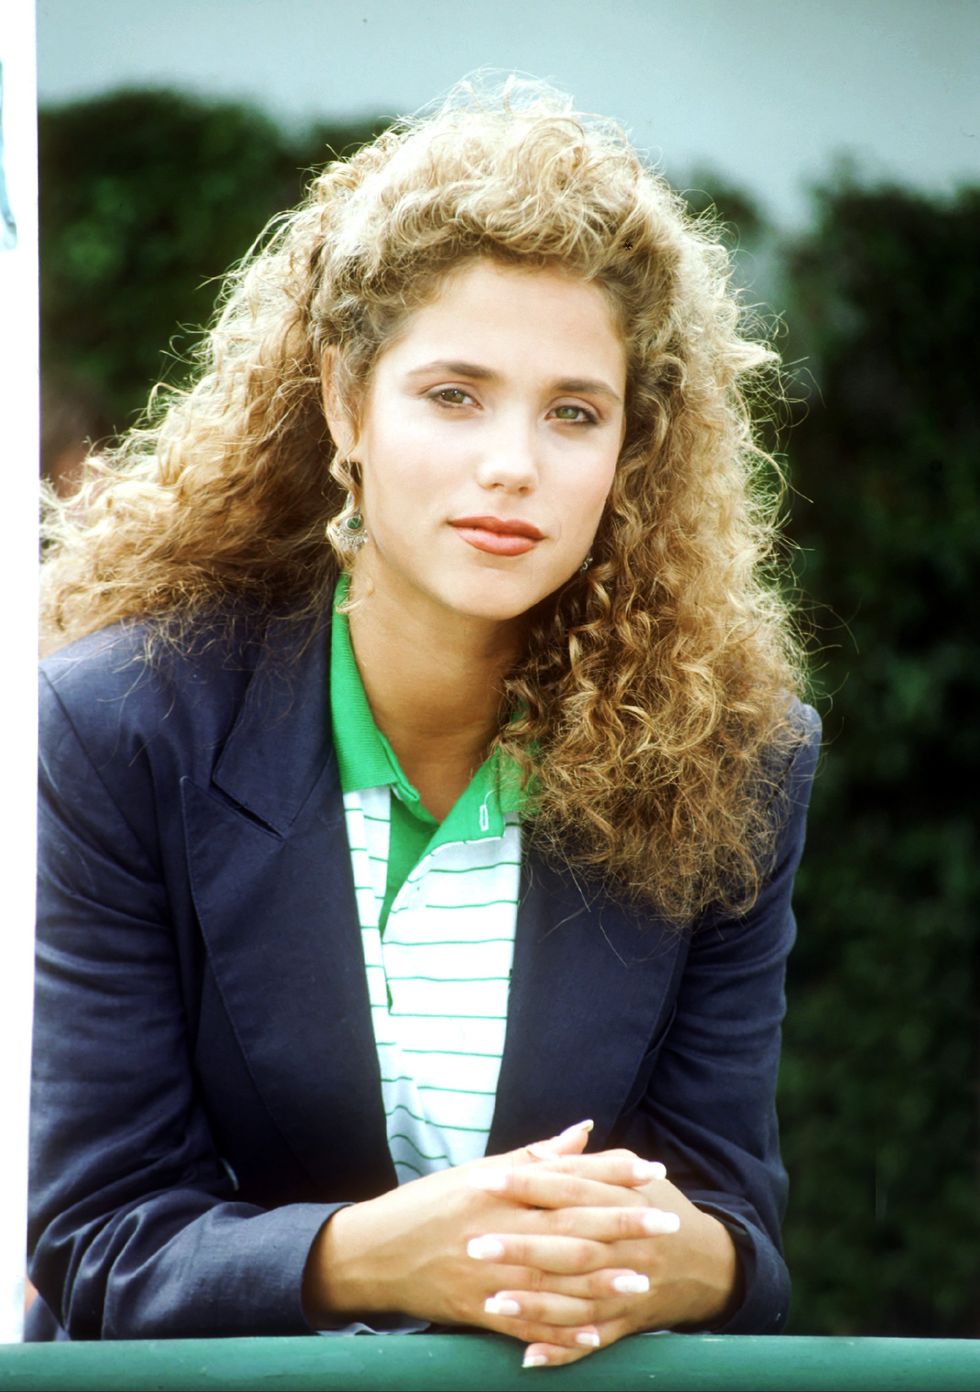 los angeles   august 20  elizabeth berkley on the set of saved by the bell at the bel air bay club in pacific palisades on august 20, 1991 in los angeles, california photo by ron wolfsongetty images